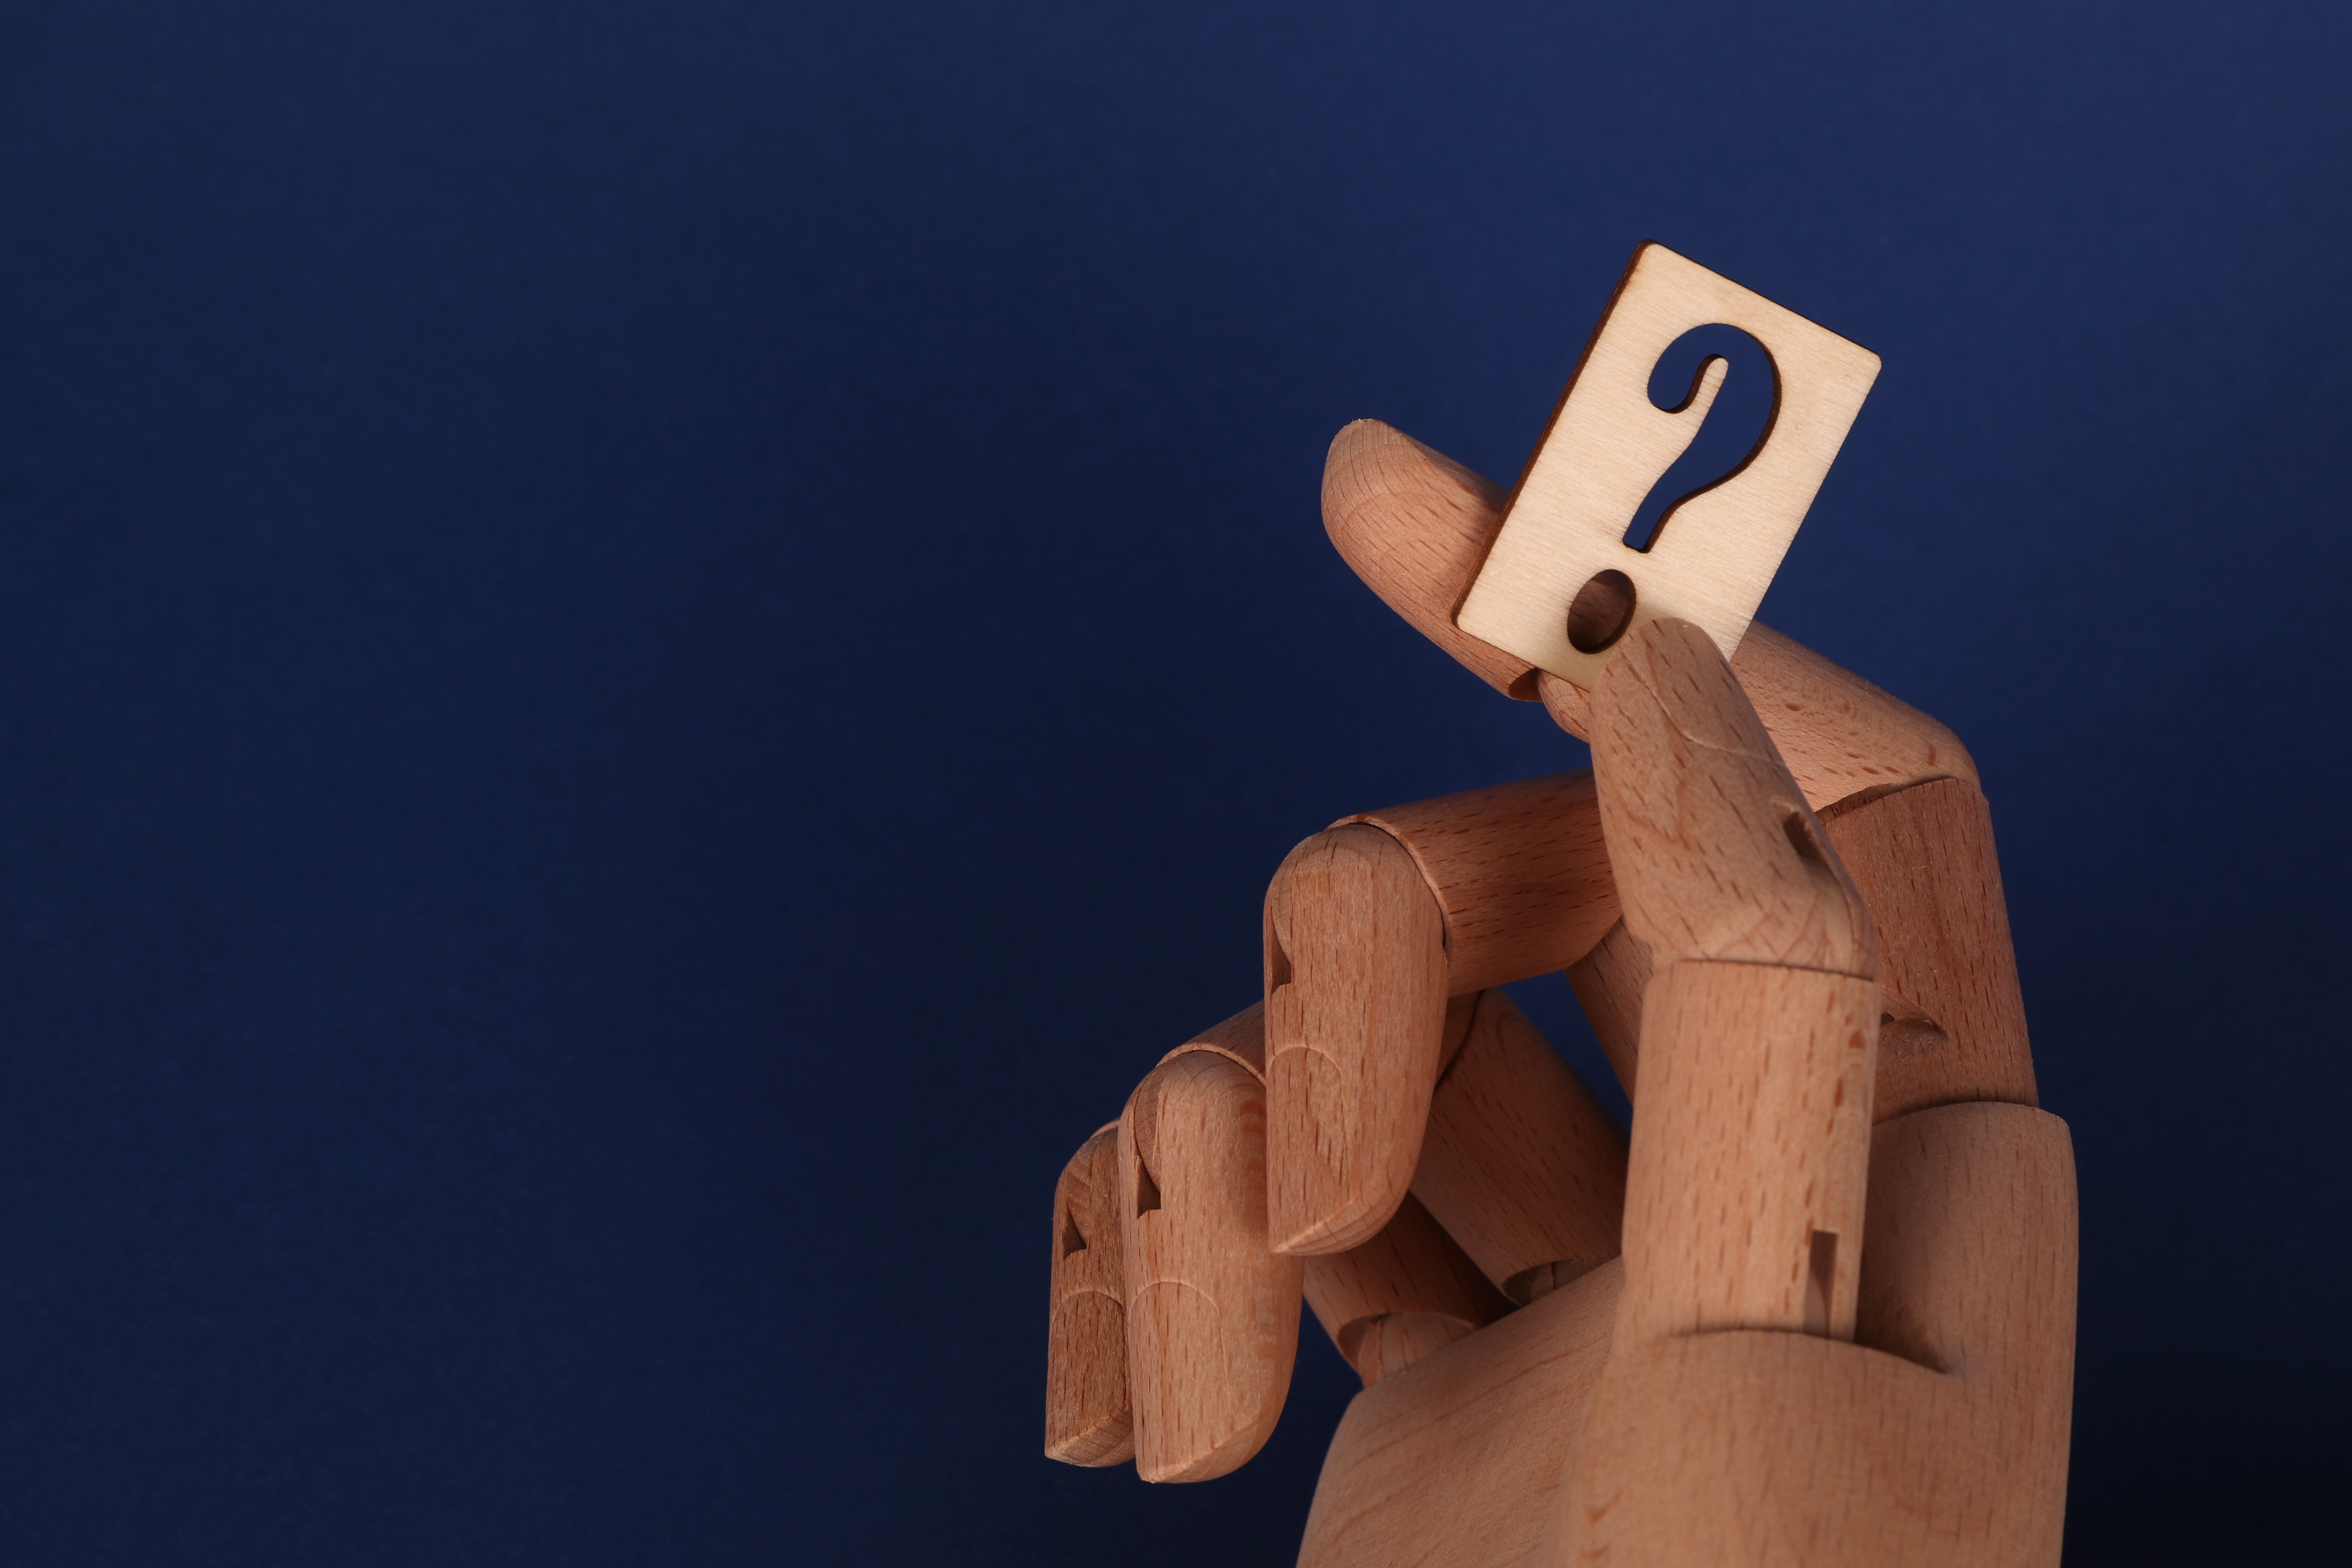 wooden hand holding a question mark block